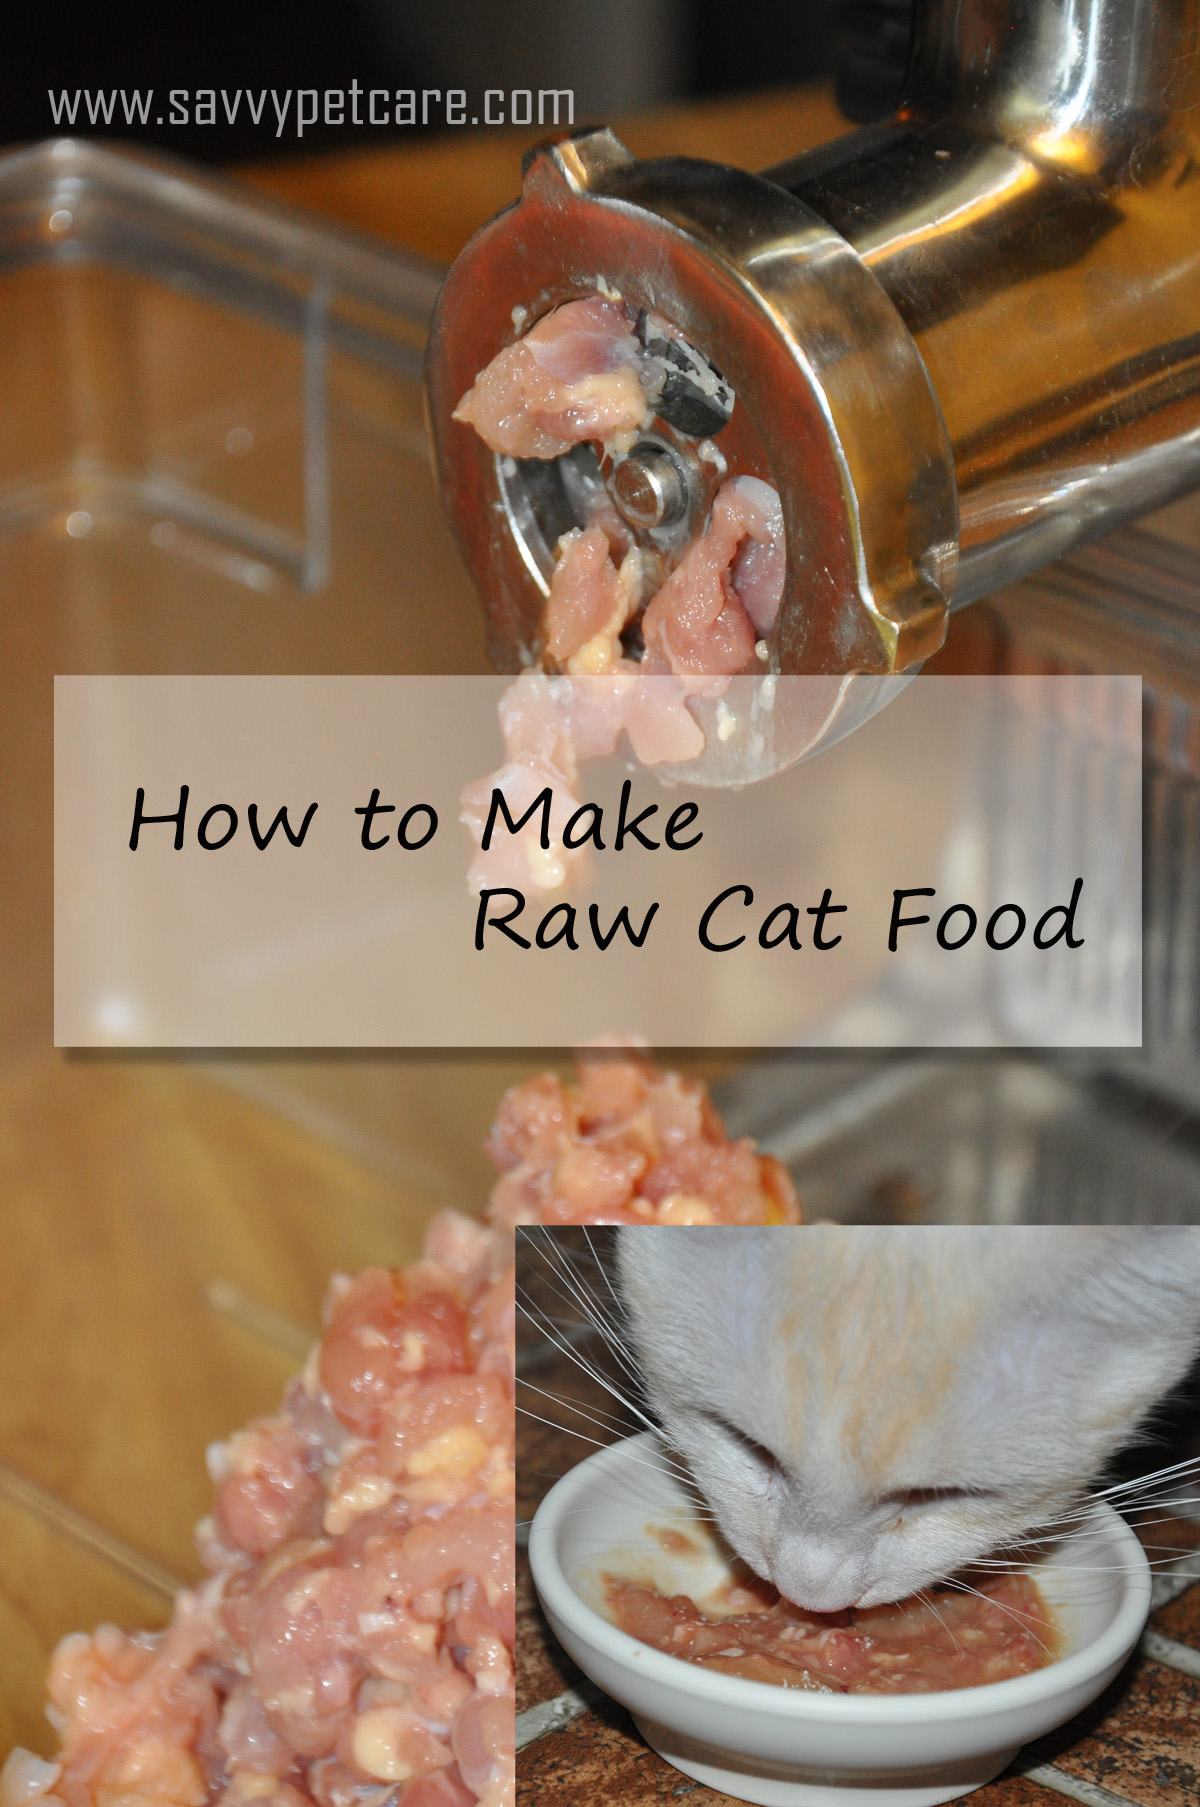 Raw Diet for Cats: How a raw diet can affect behavior